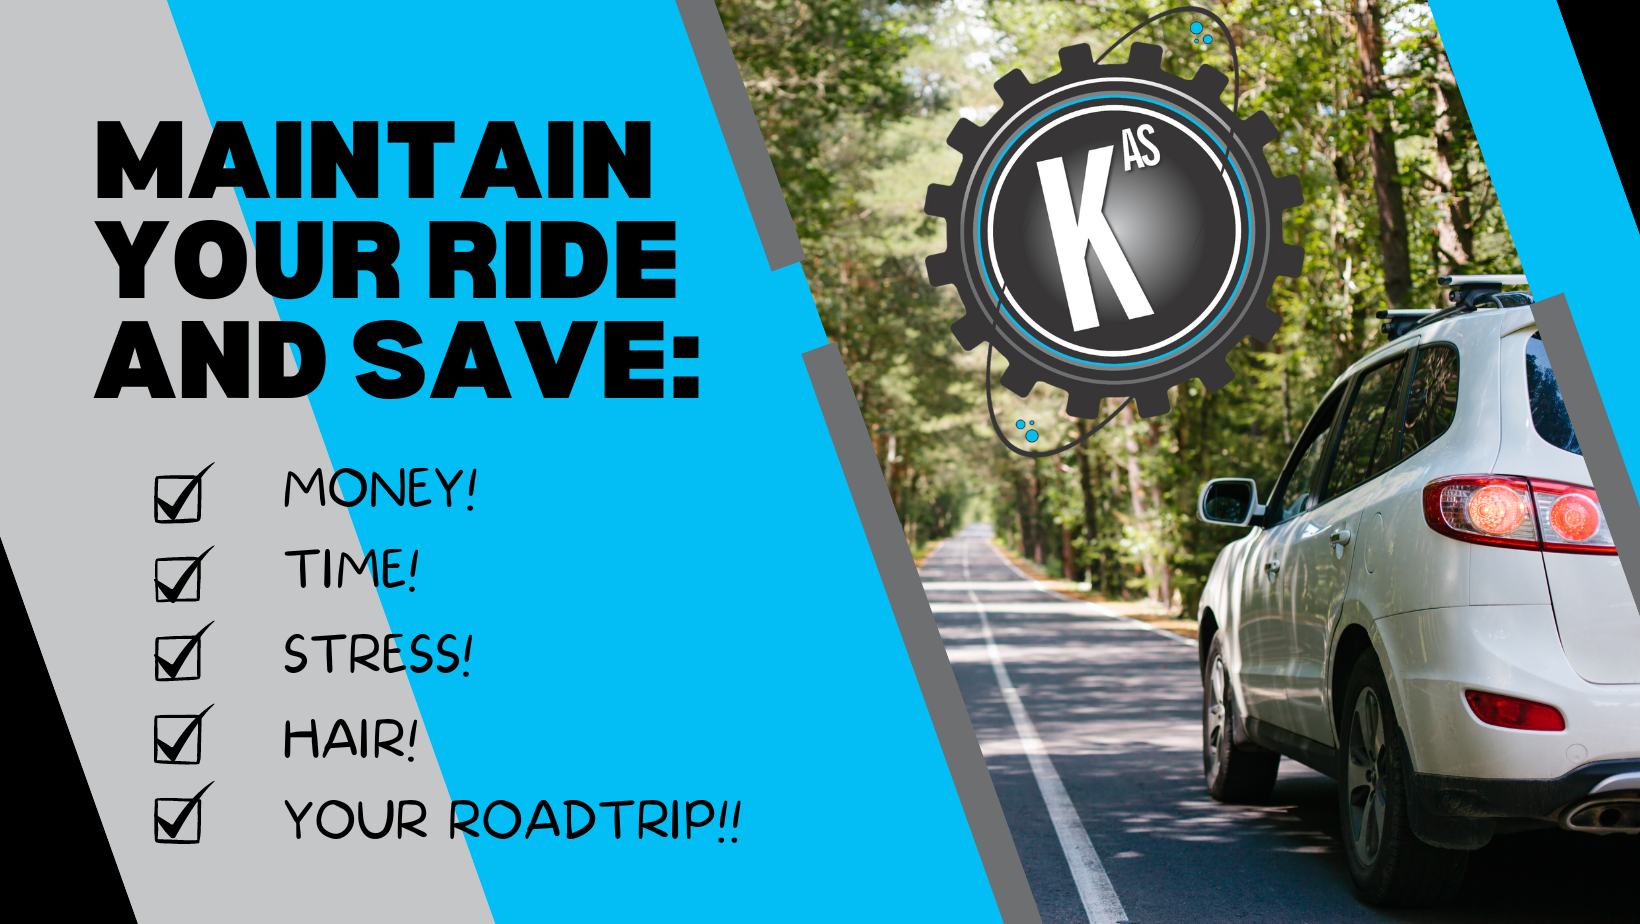 Maintain Your Ride And Save!